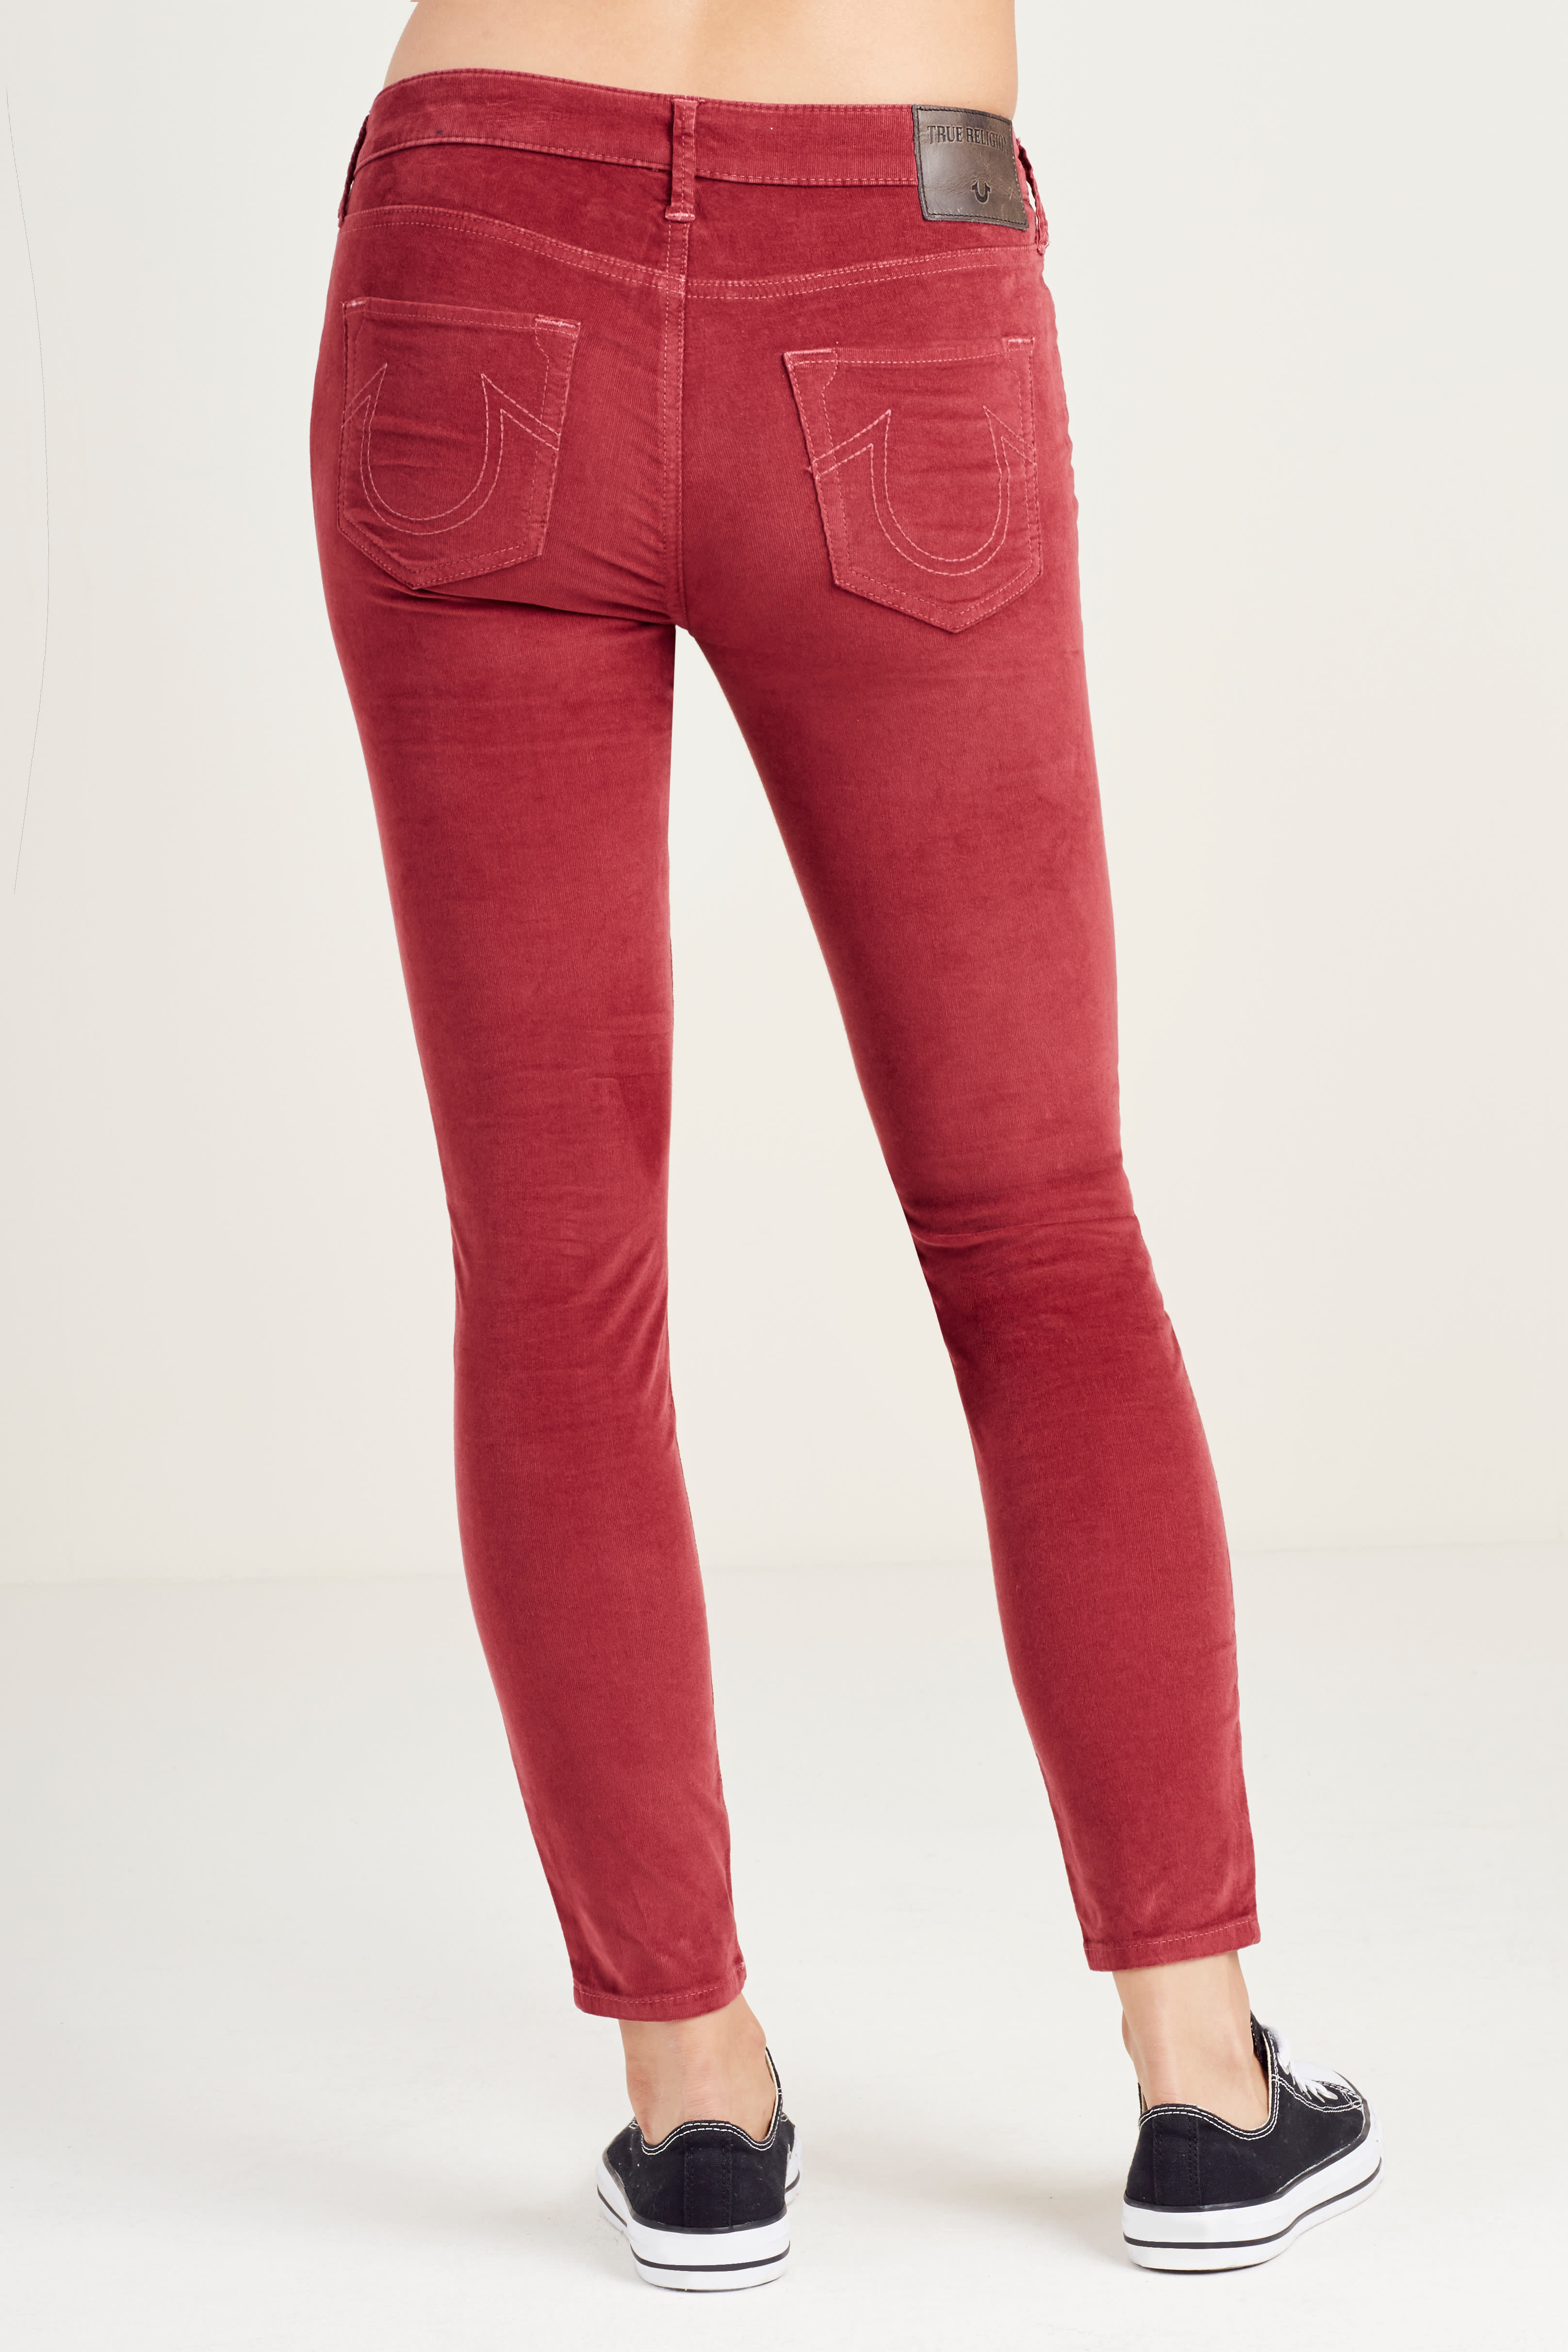 HAND PICKED SUPER SKINNY CROPPED CORDUROY WOMENS PANT